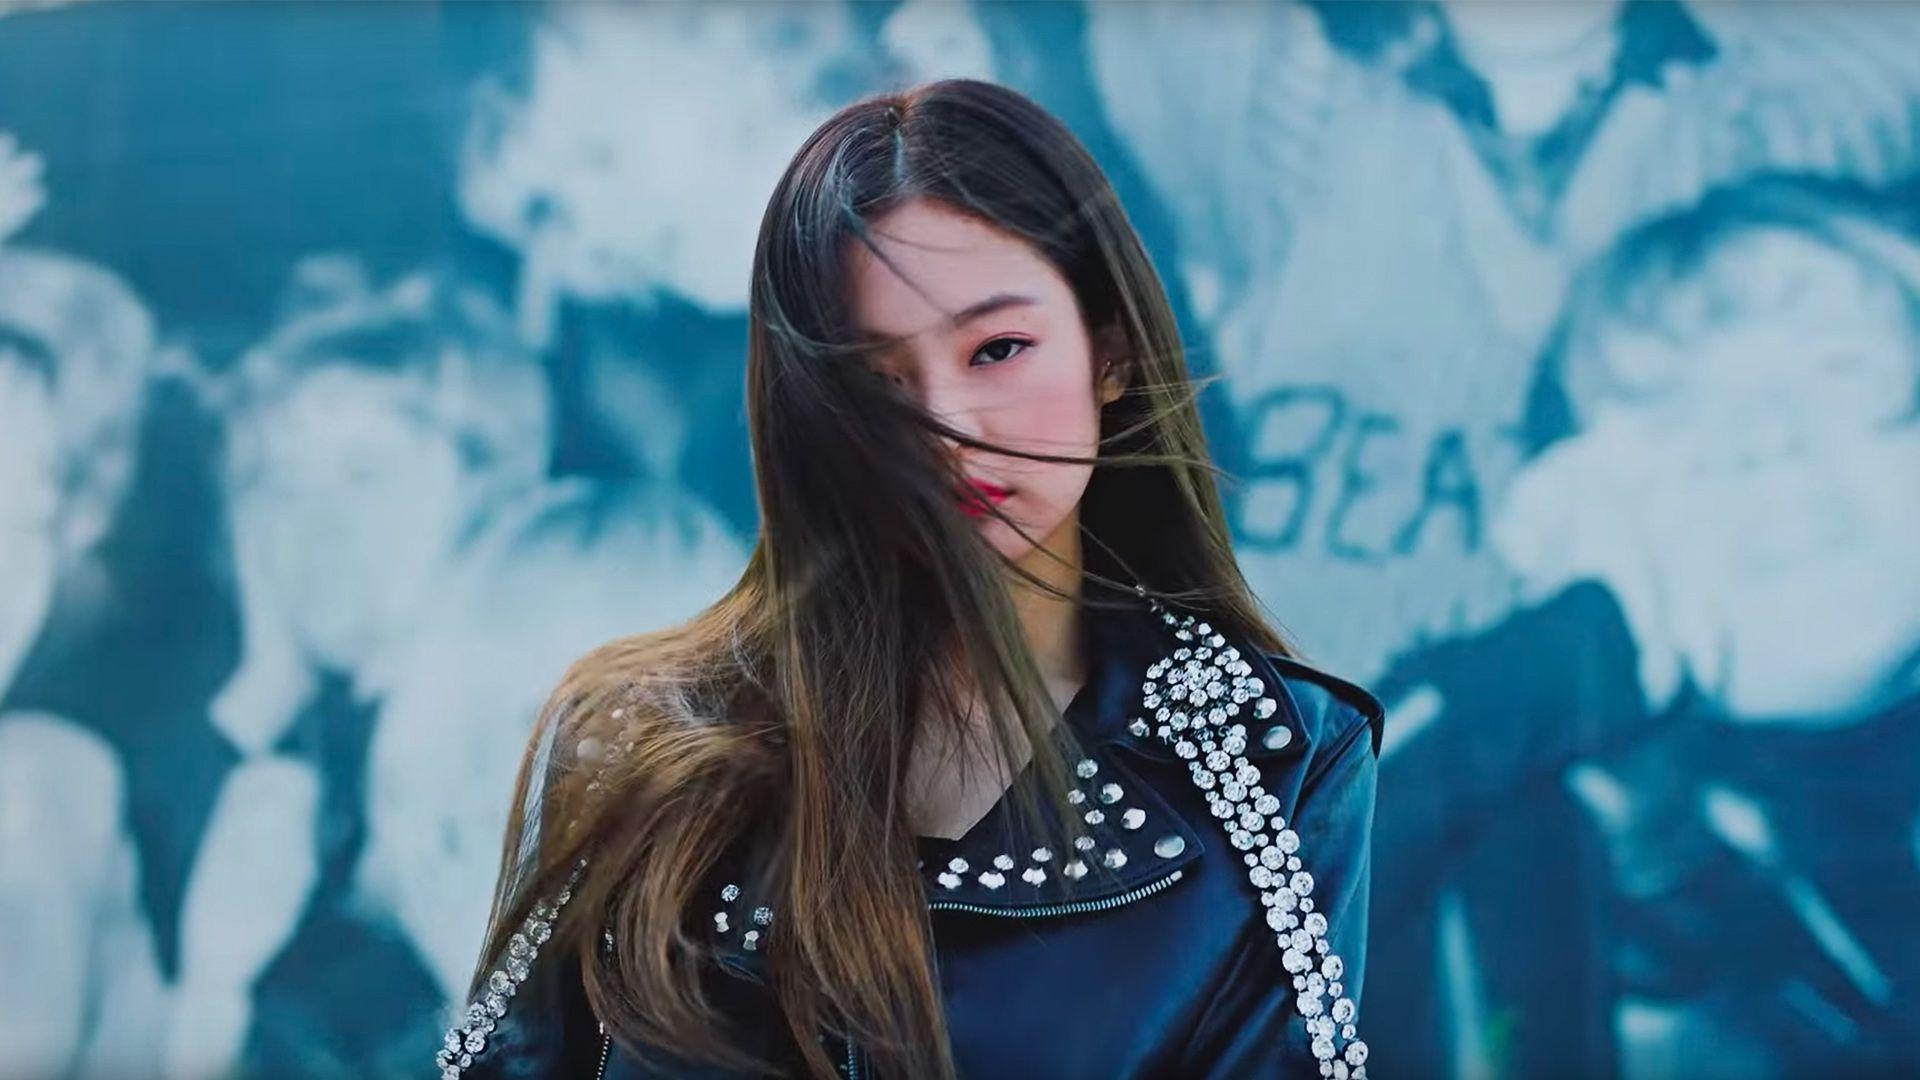 BLACKPINK's Jennie makes her 'Solo' debut and the Internet is